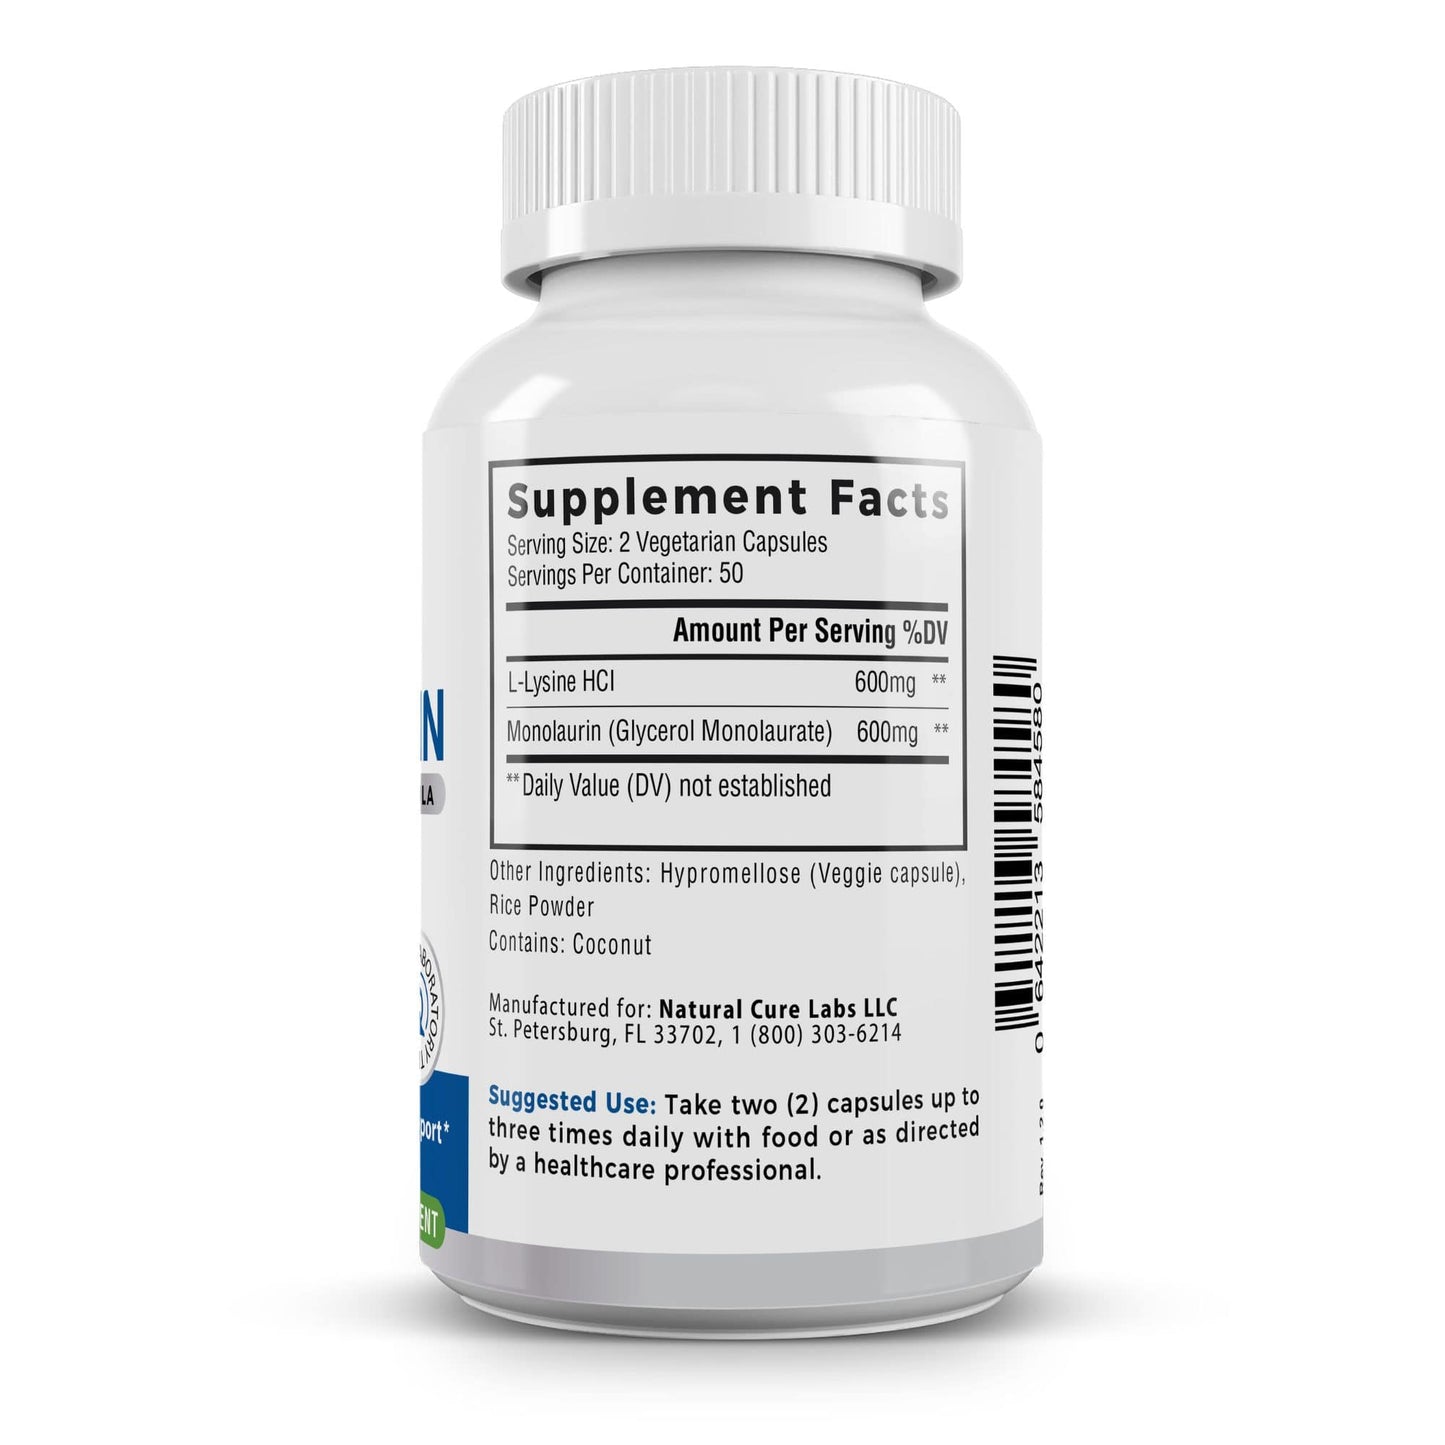 
                  
                    Right side of the Natural Cure Labs L-Lysine + Monolaurin bottle, displaying supplement facts, including serving size of two vegetarian capsules with 600mg of L-Lysine HCl and 600mg of Monolaurin per serving.
                  
                